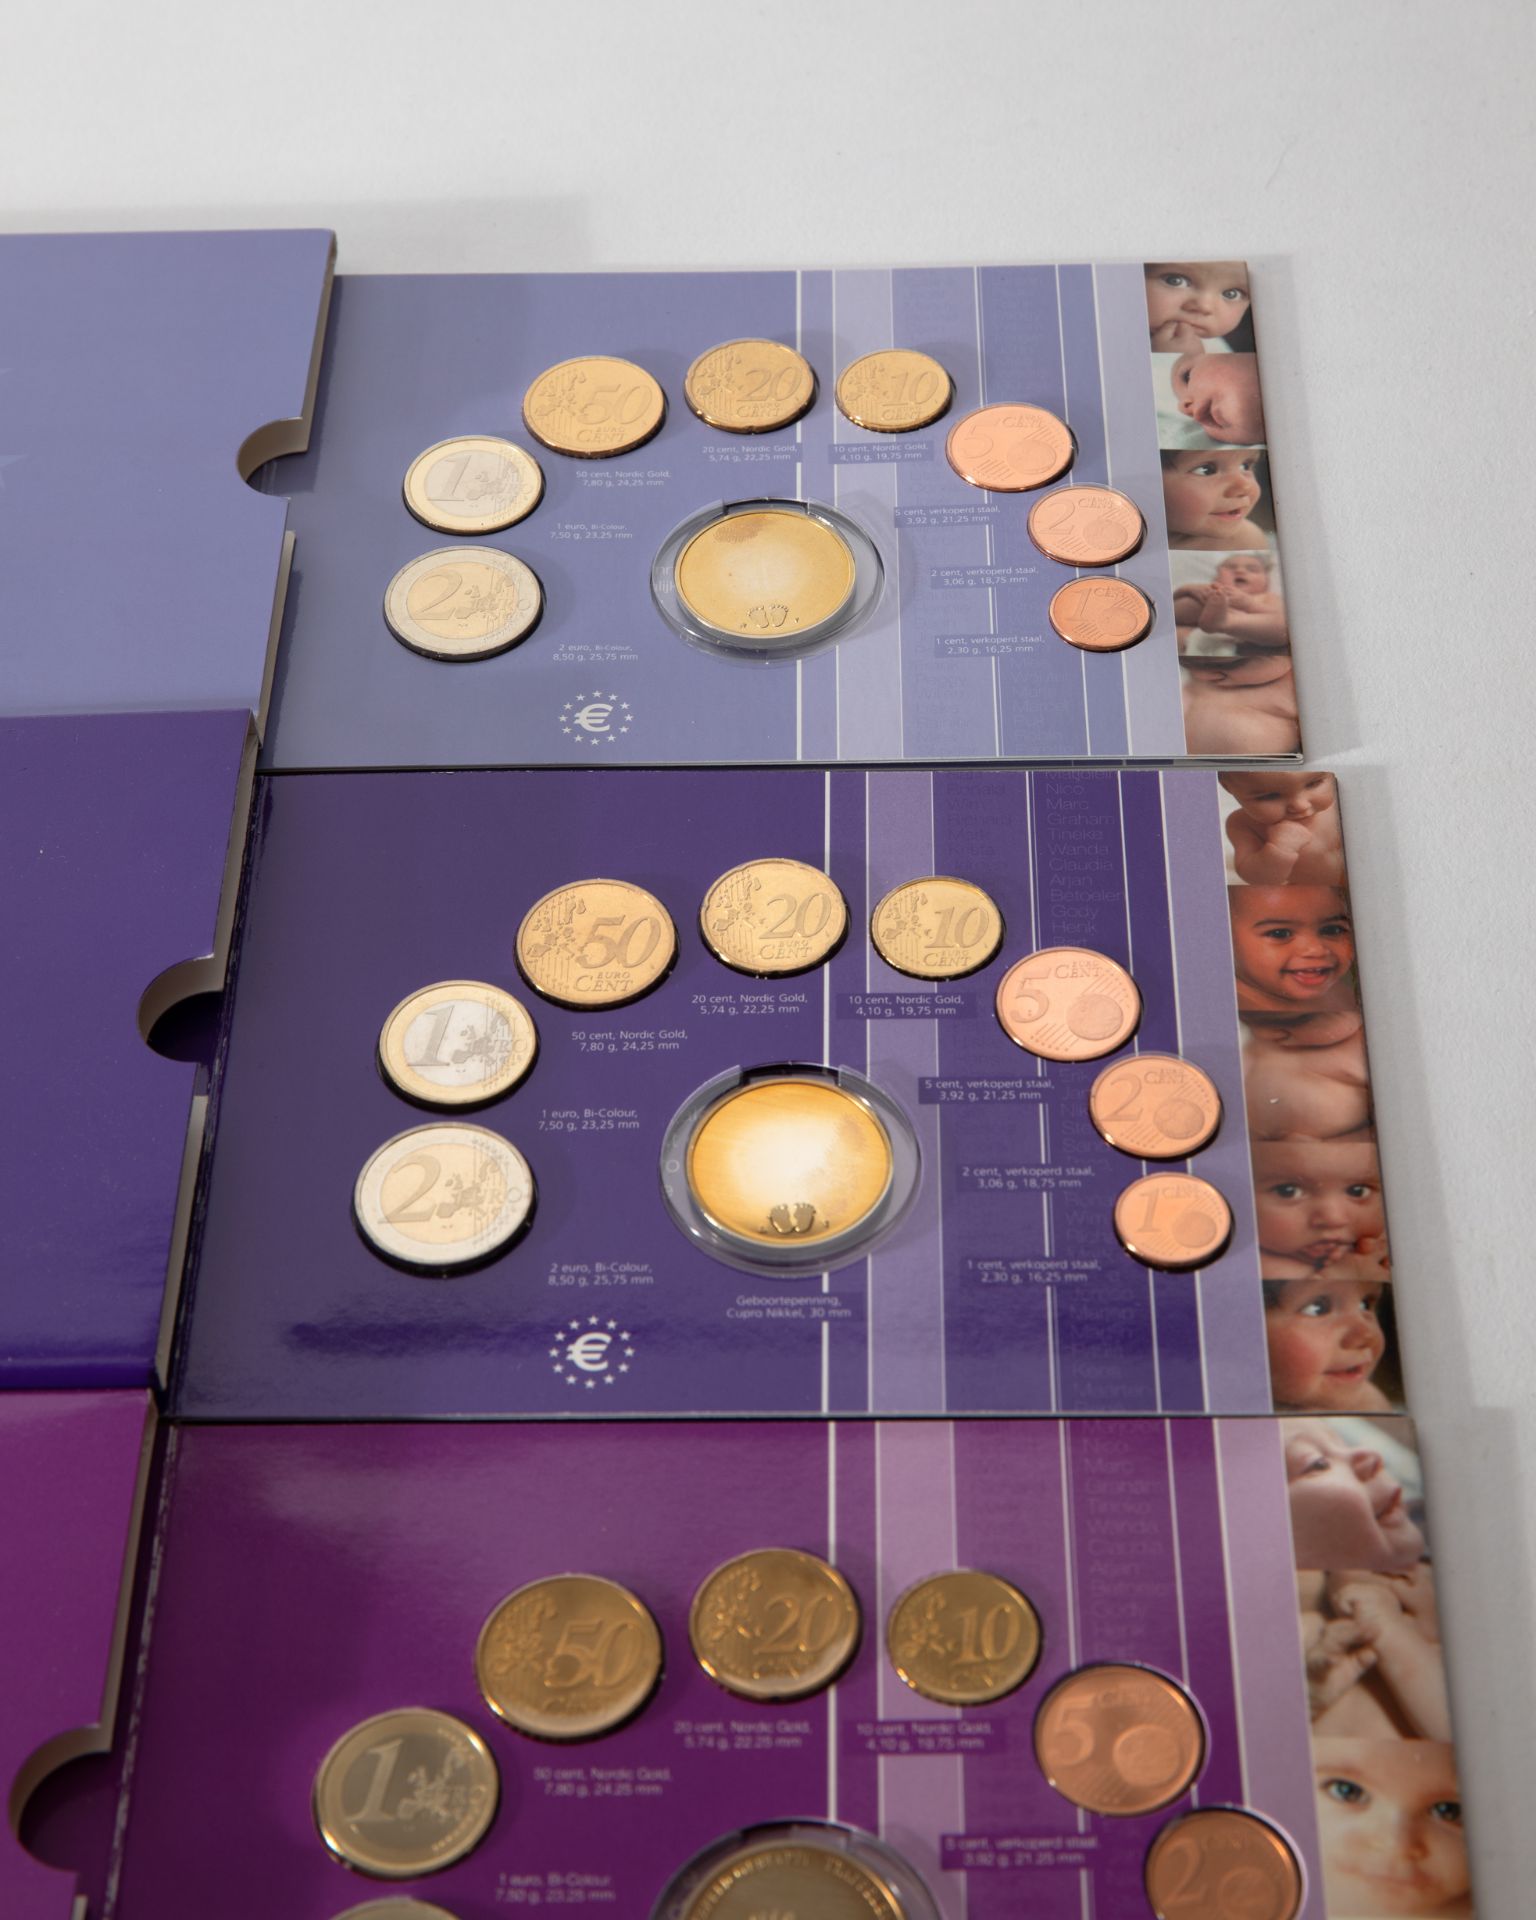 14x Netherlands Euro Coin Sets - Image 9 of 10